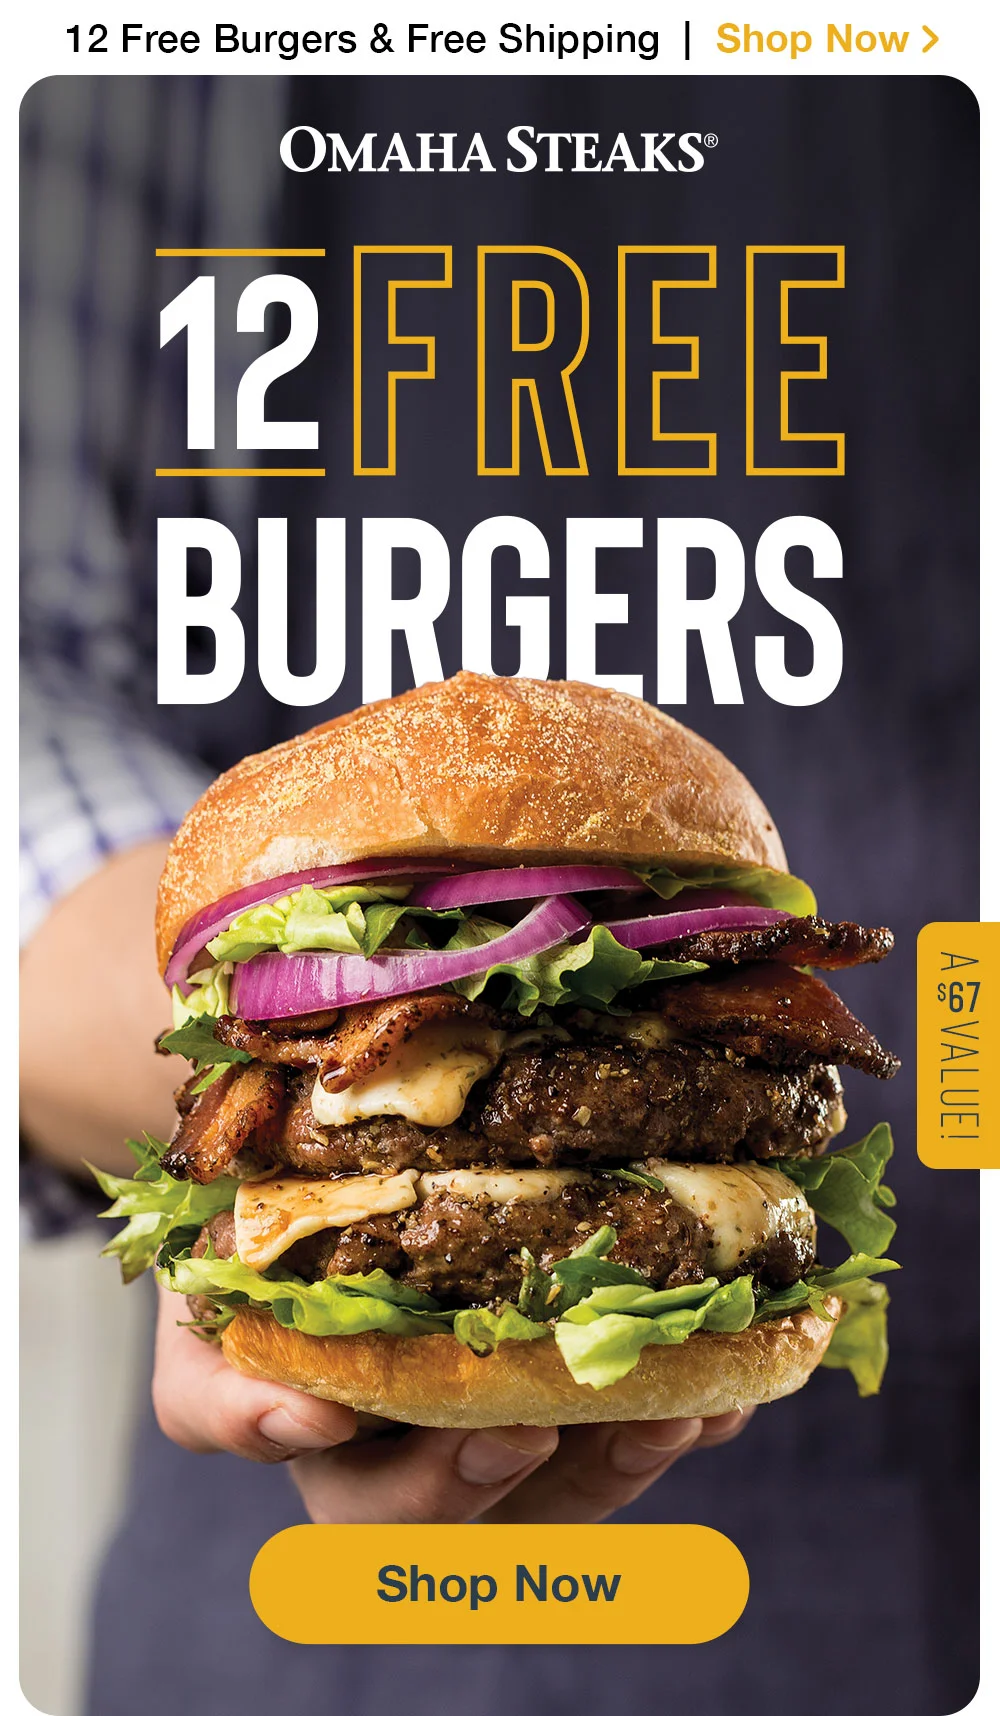 12 FREE BURGERS + FREE SHIPPING | SHOP NOW > | 12 FREE BURGERS | A \\$67 VALUE! || SHOP NOW